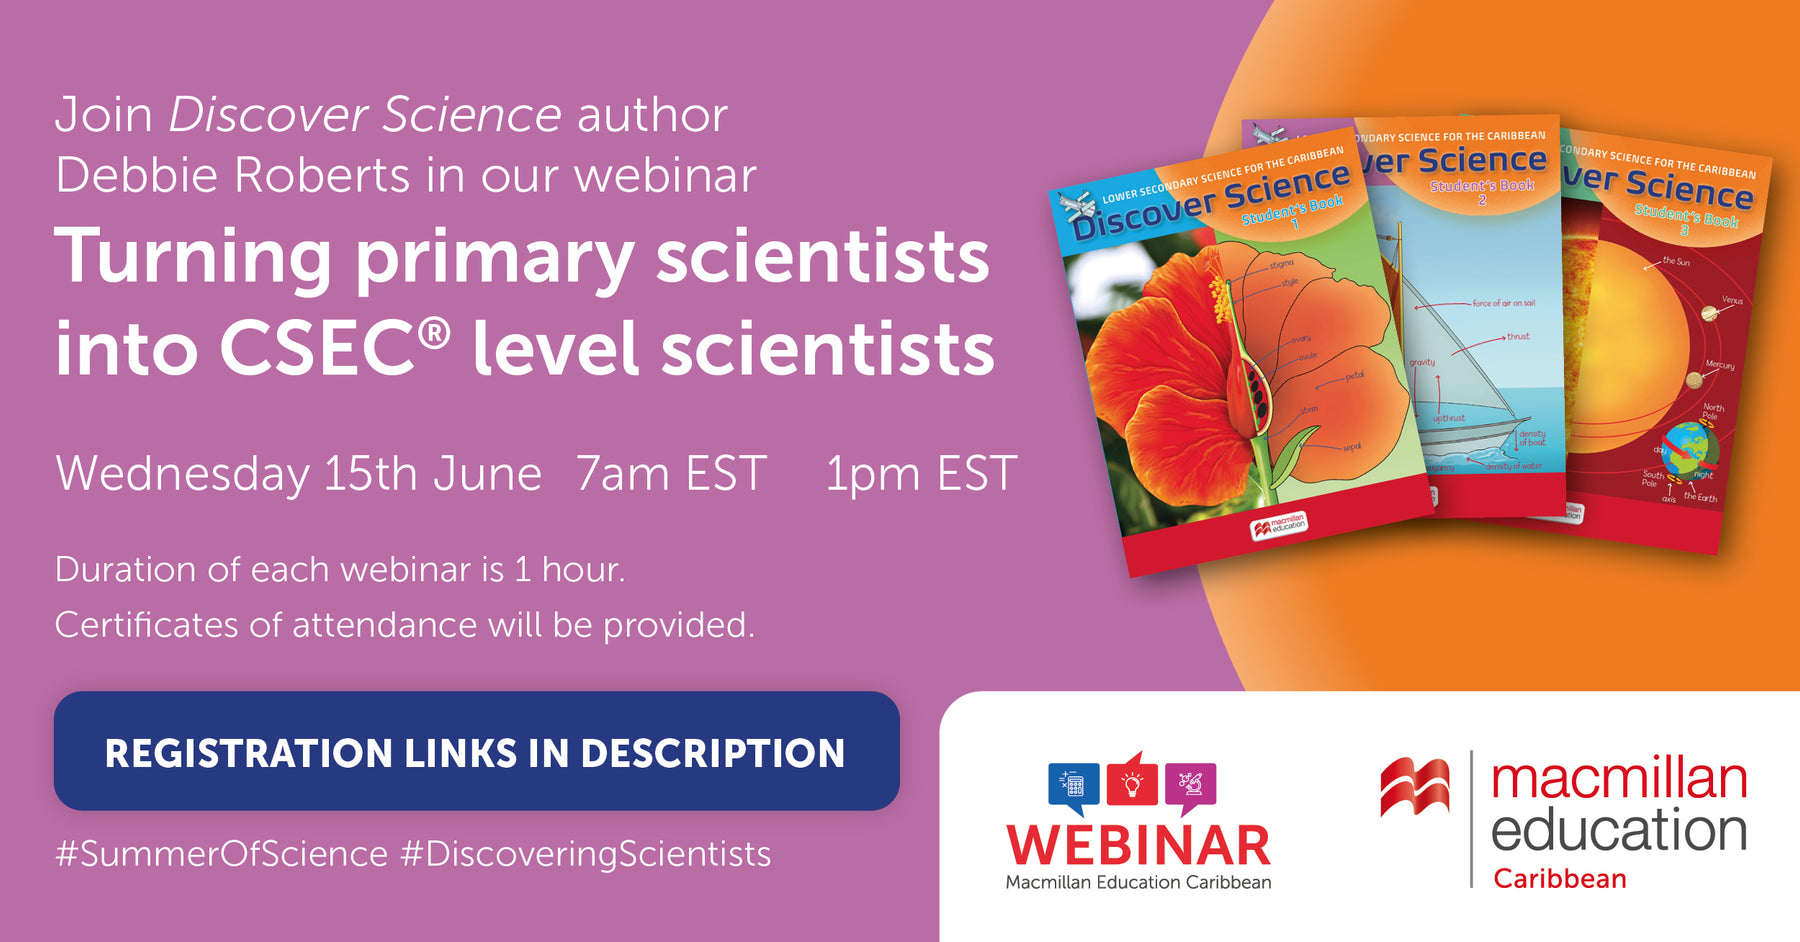 Join our webinar and turn your primary scientists into CSEC® level scientists